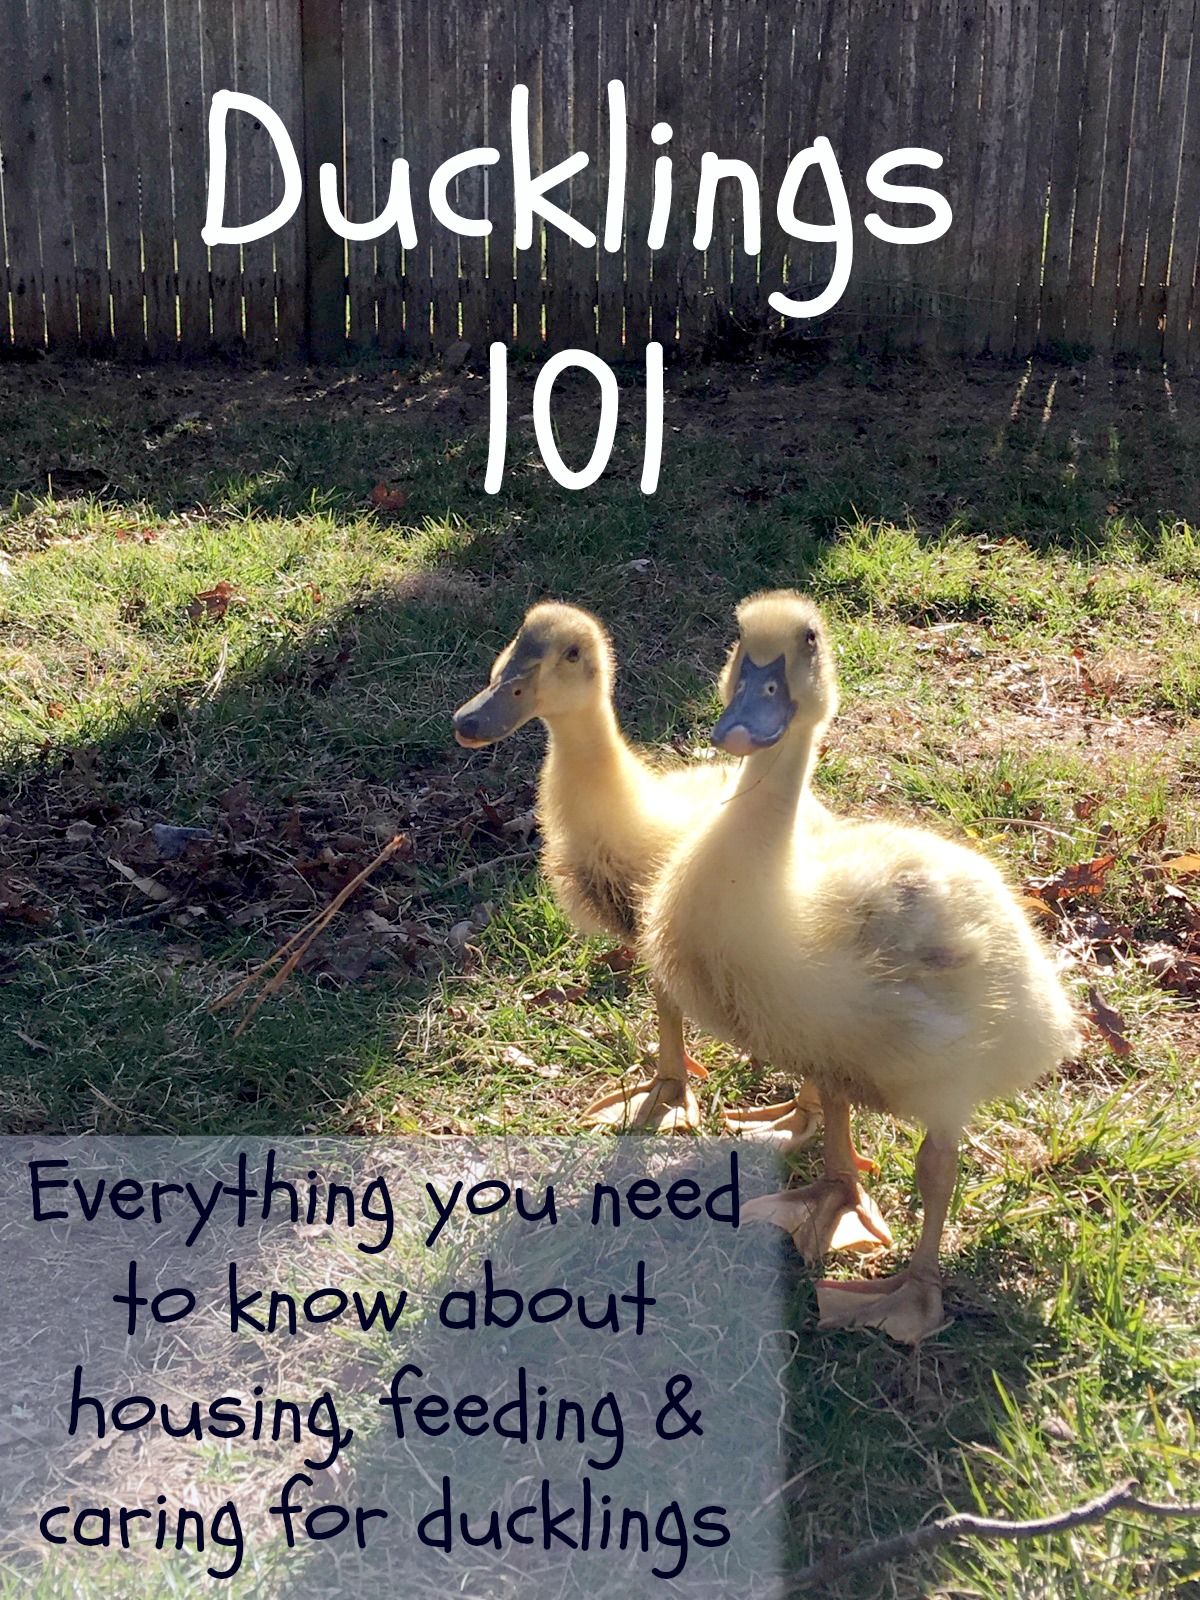 Ducklings 101 - The Cape Coop